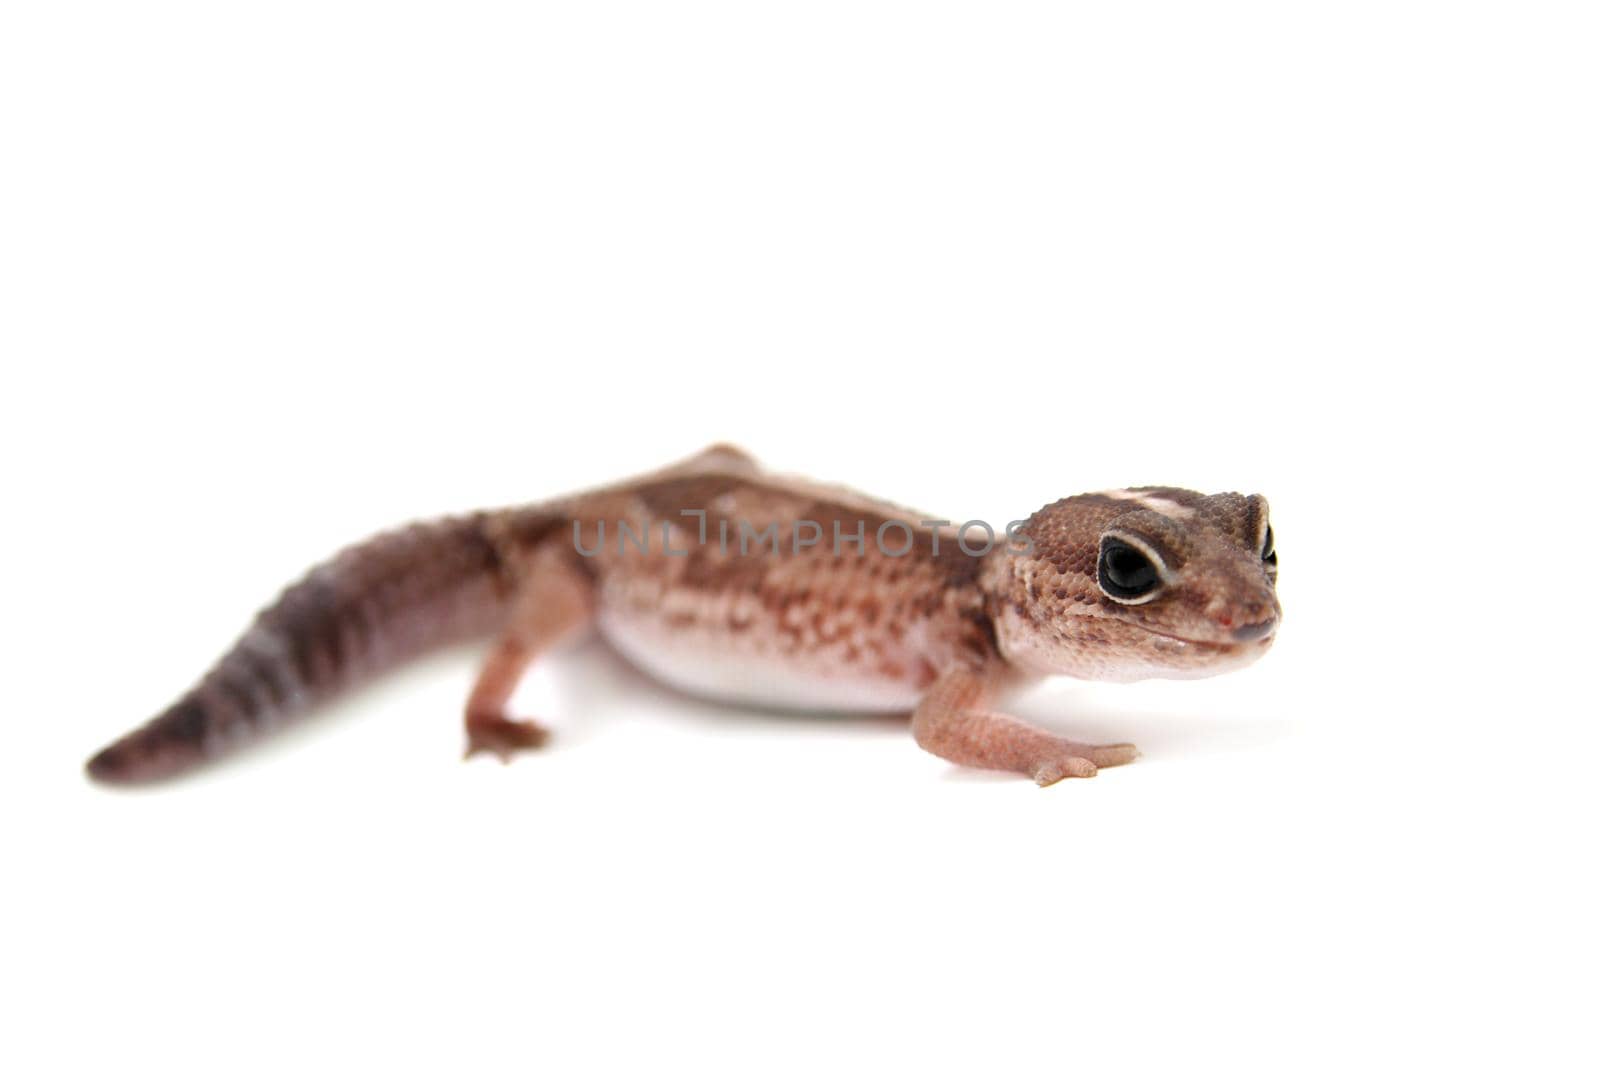 Leopard gecko on white by RosaJay